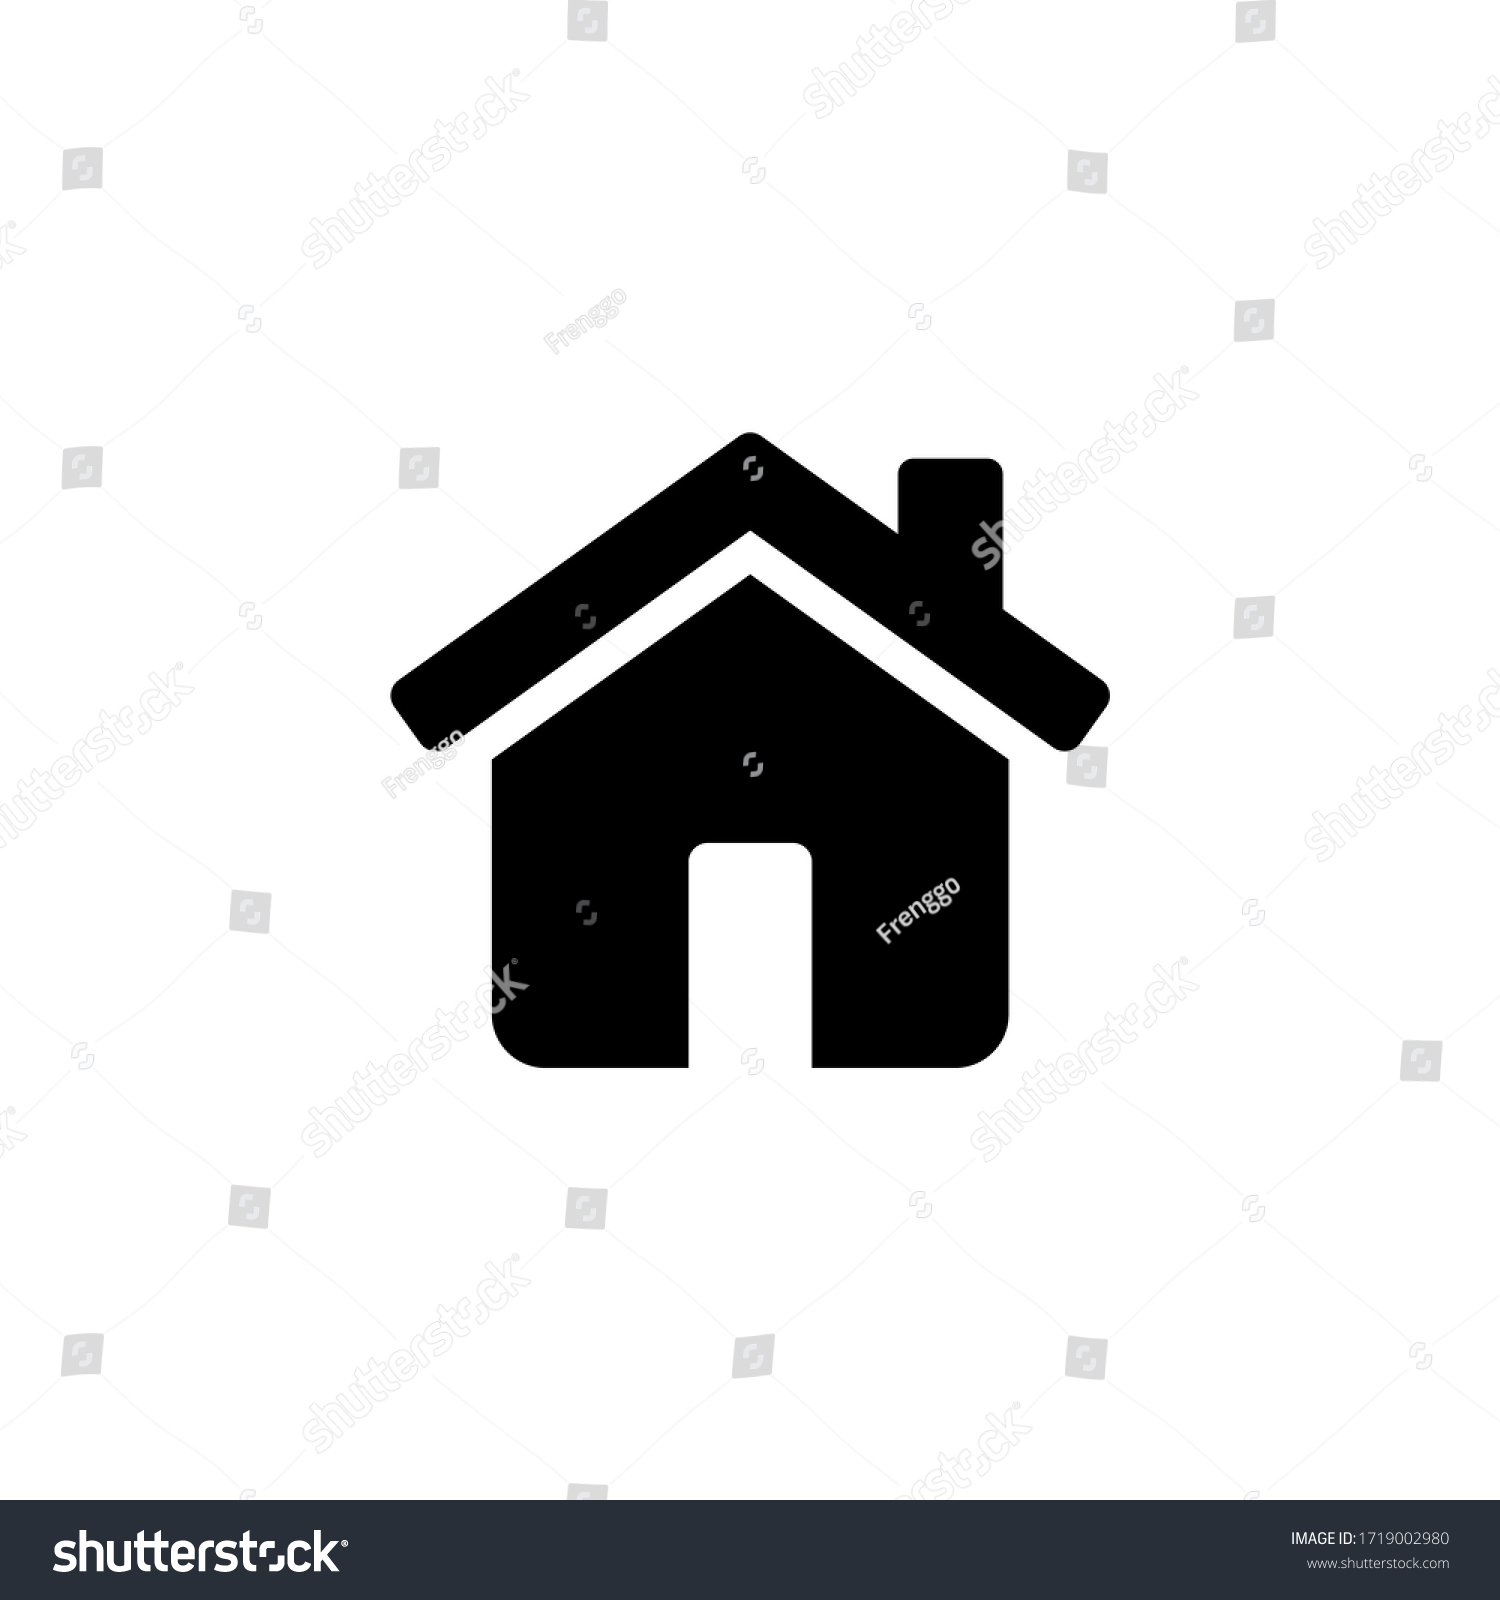 SVG of Home icon vector. House, real estate icon symbol isolated svg